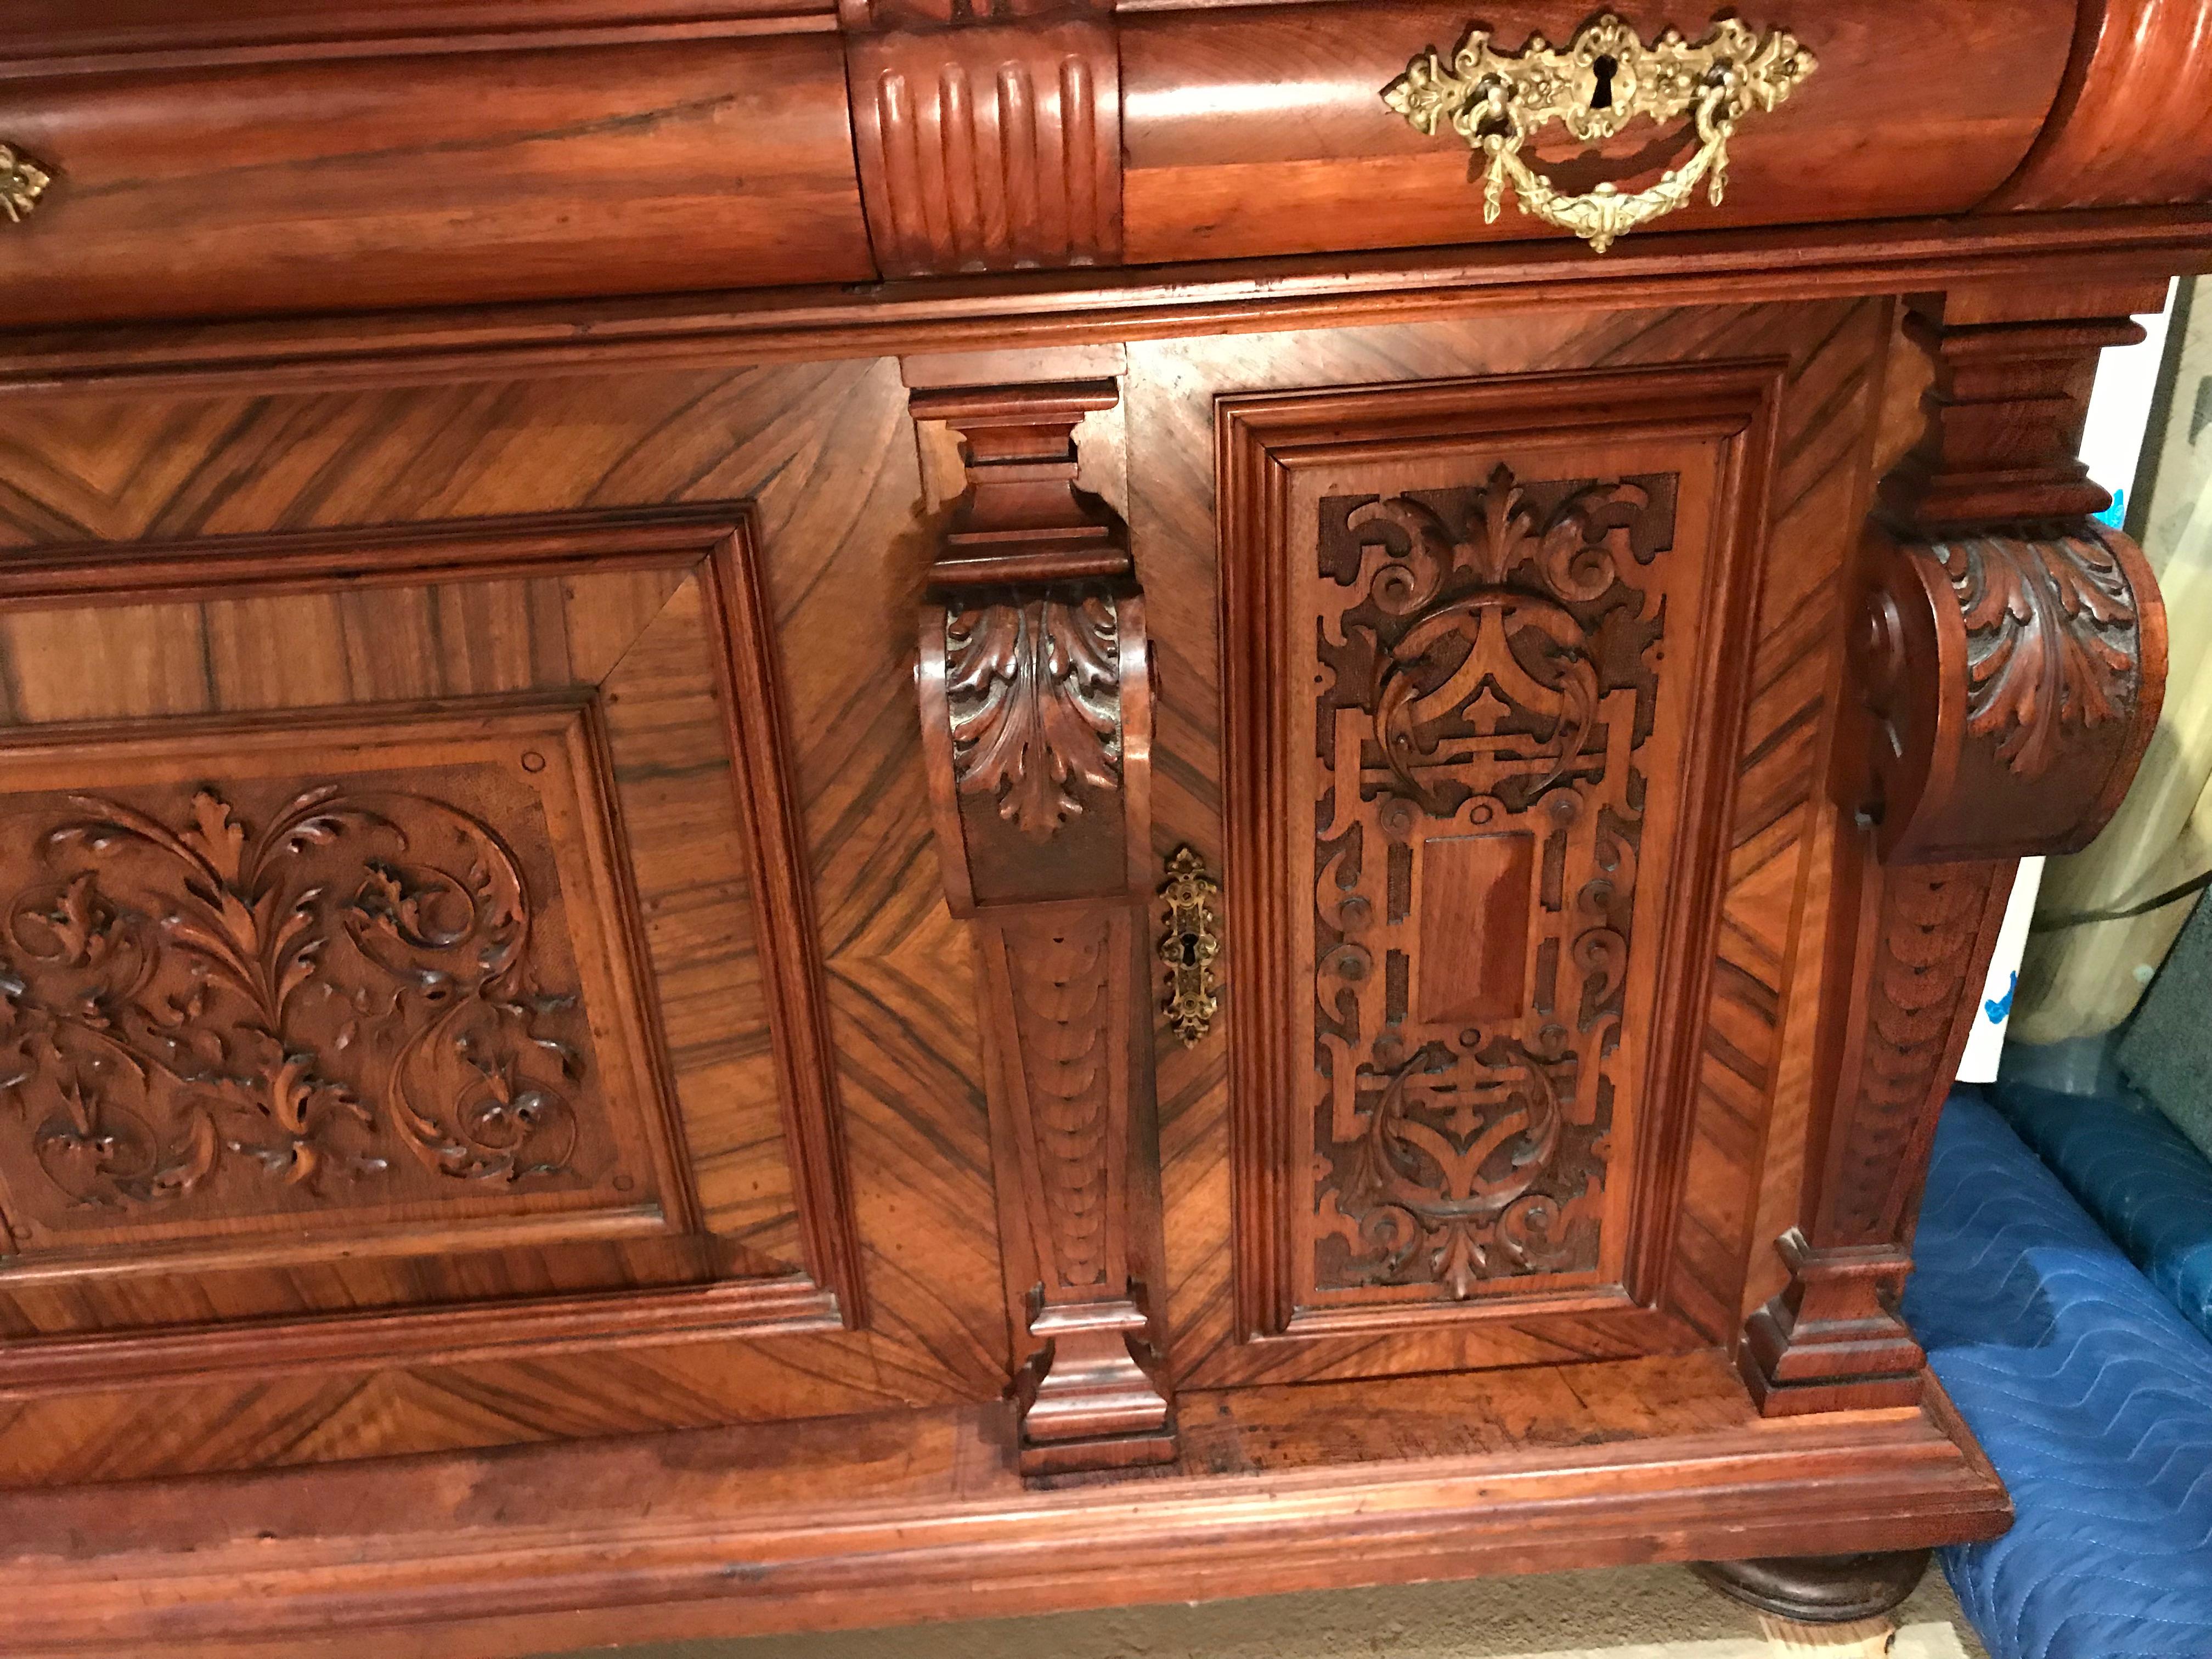 Hand-Carved German Walnut Schrank or Cabinet with Boldly Carved Panel Doors